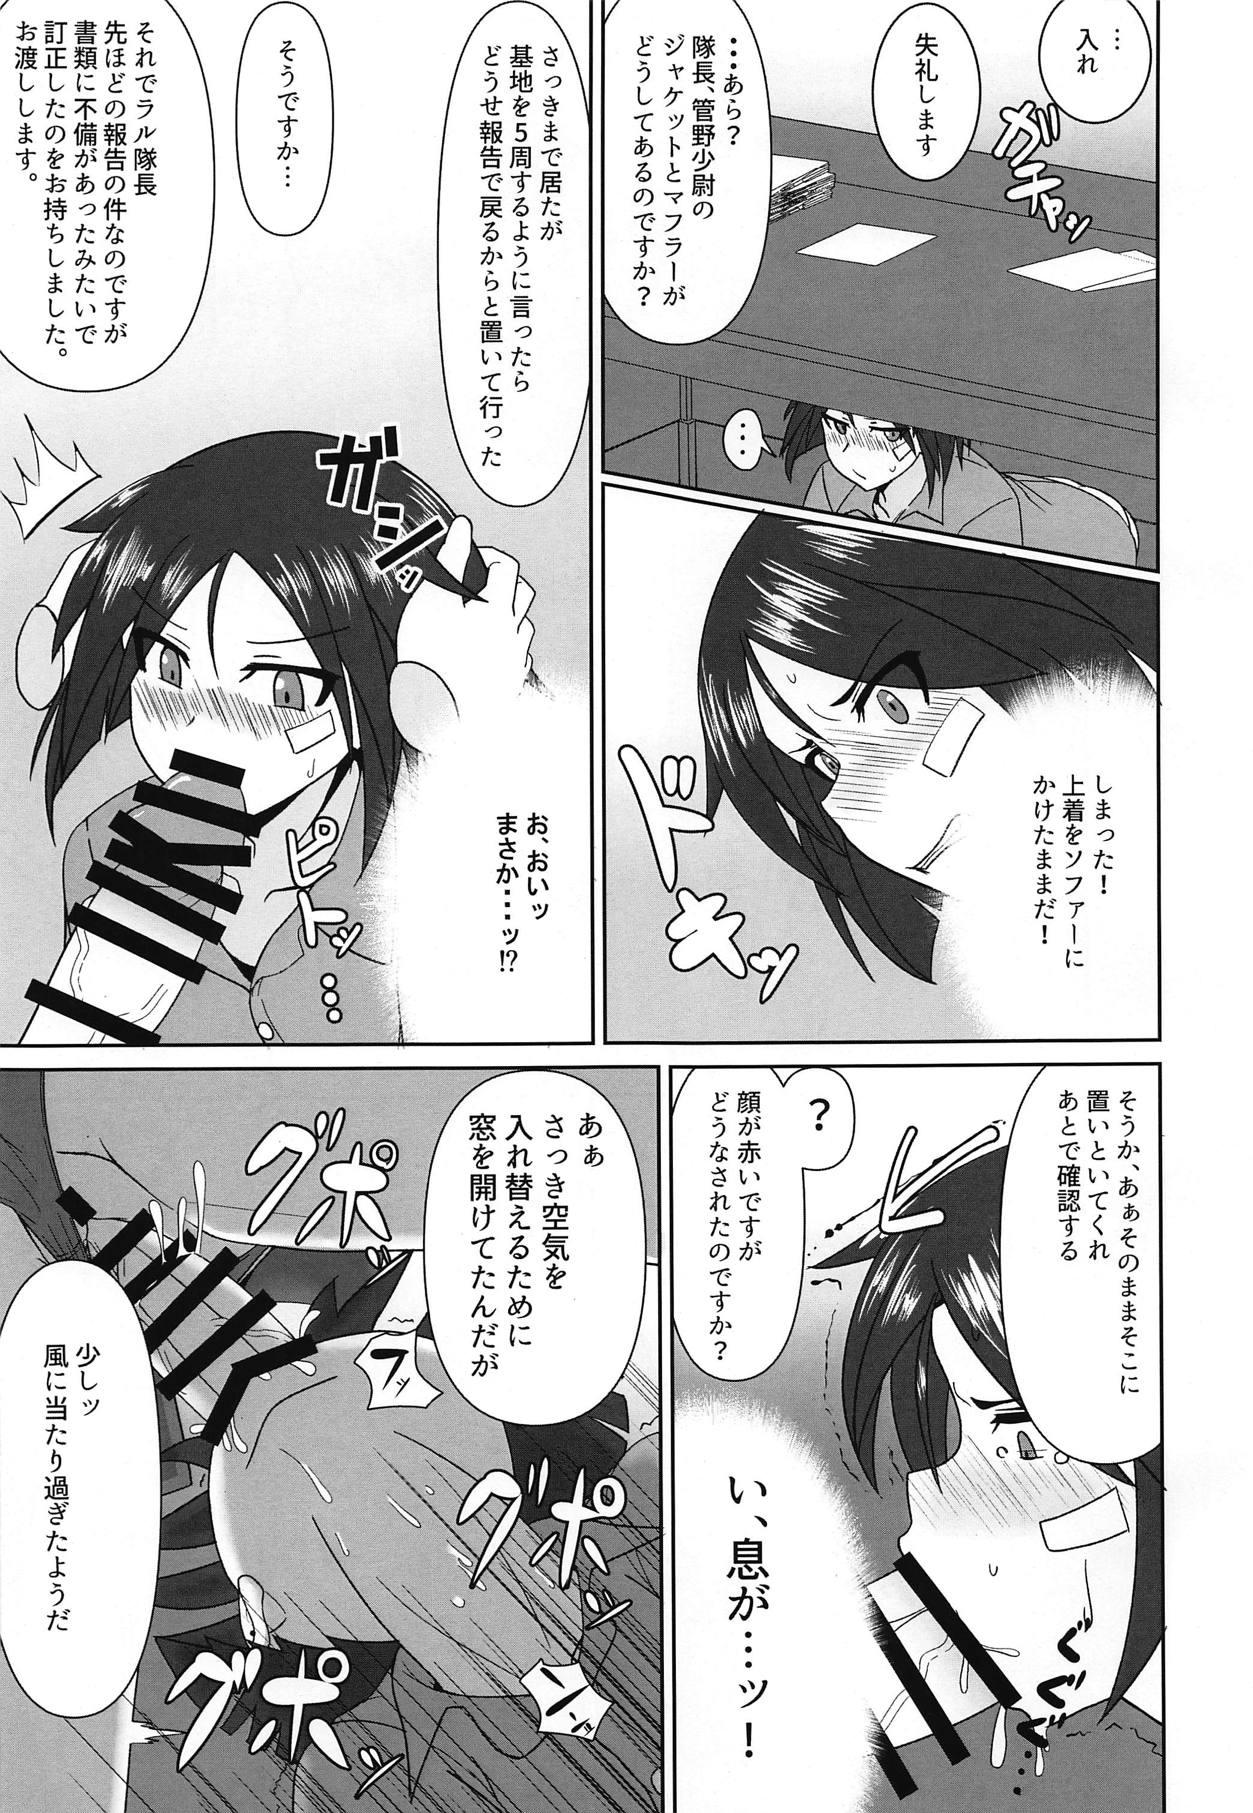 Pussylick Nao-chan no Houshi Katsudou - Brave witches Pussyeating - Page 8